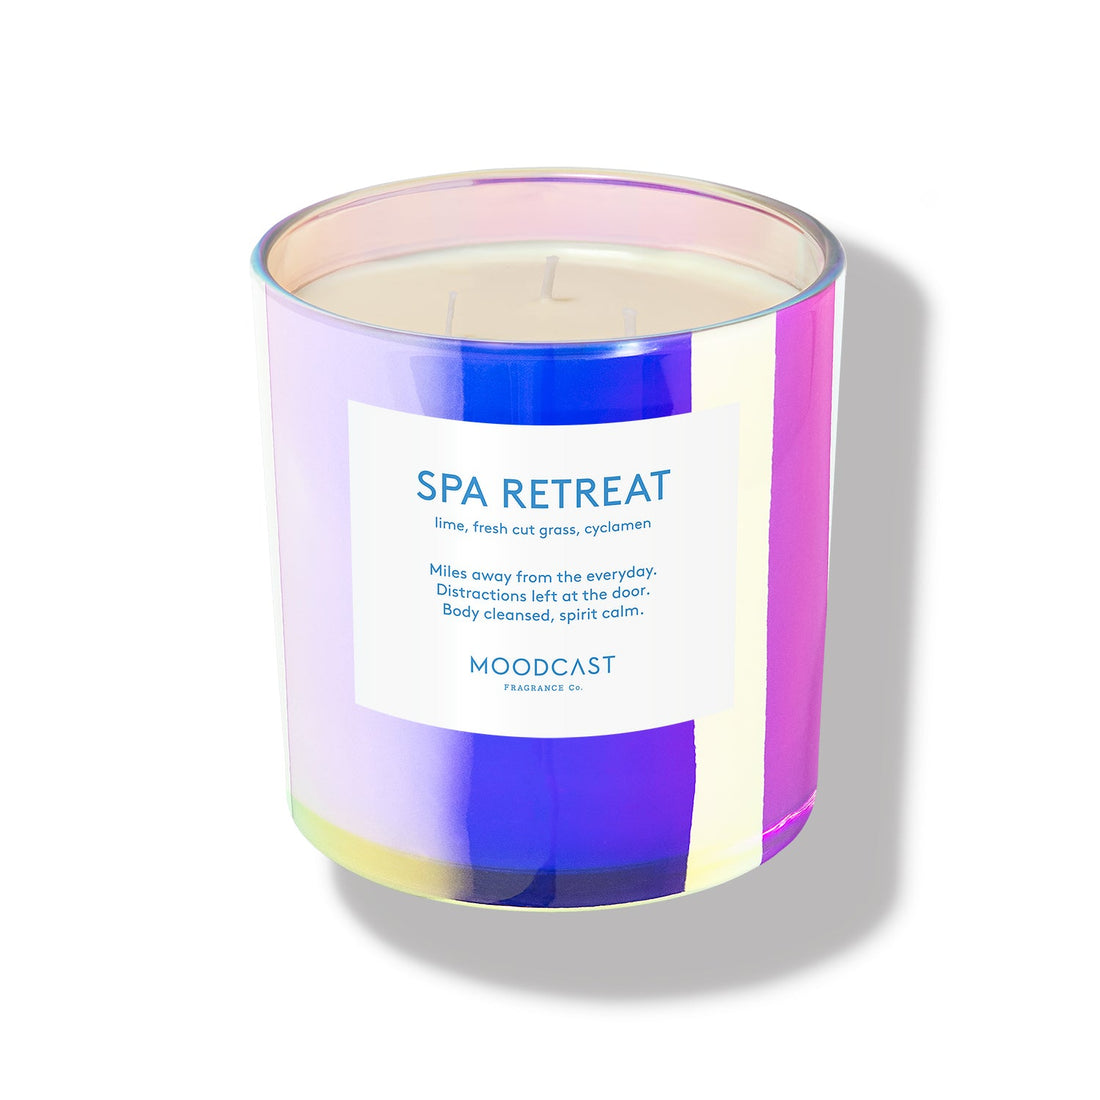 Spa Retreat - Vibes Collection (Iridescent) - 24oz/680g Coconut Wax Blend Glass Jar 3-Wick Candle - Key Notes: Lime, Fresh Cut Grass, Cyclamen